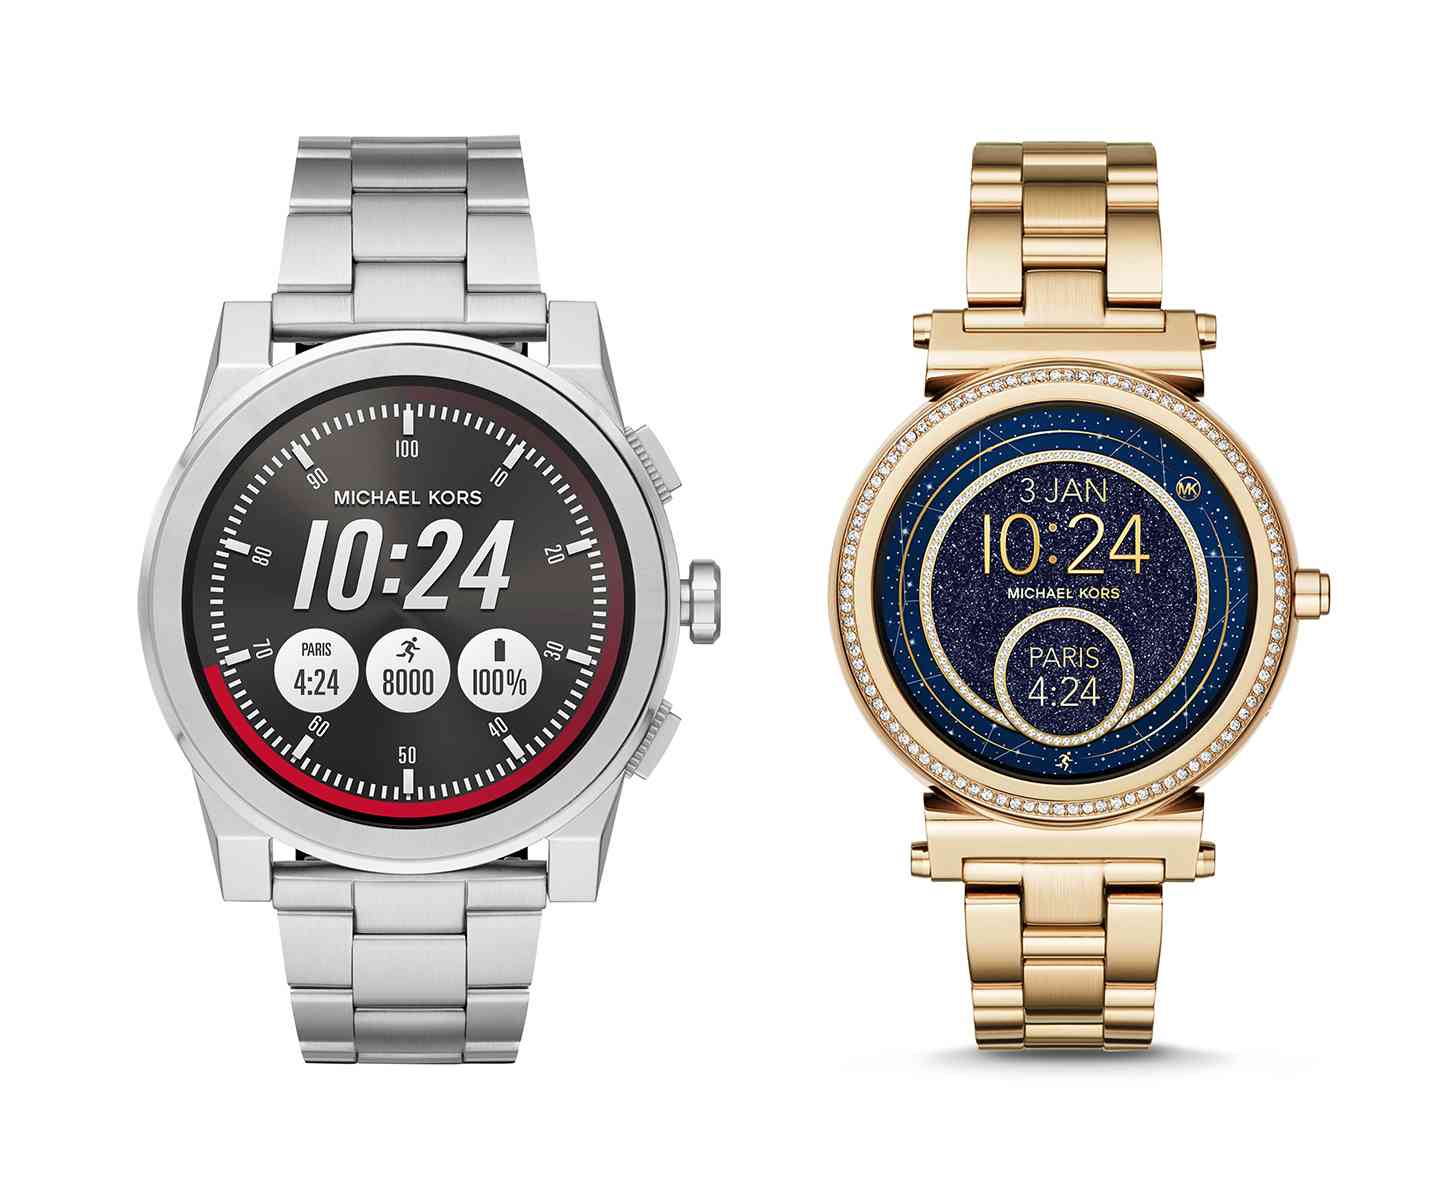 Michael Kors Android Wear 2.0 smartwatches